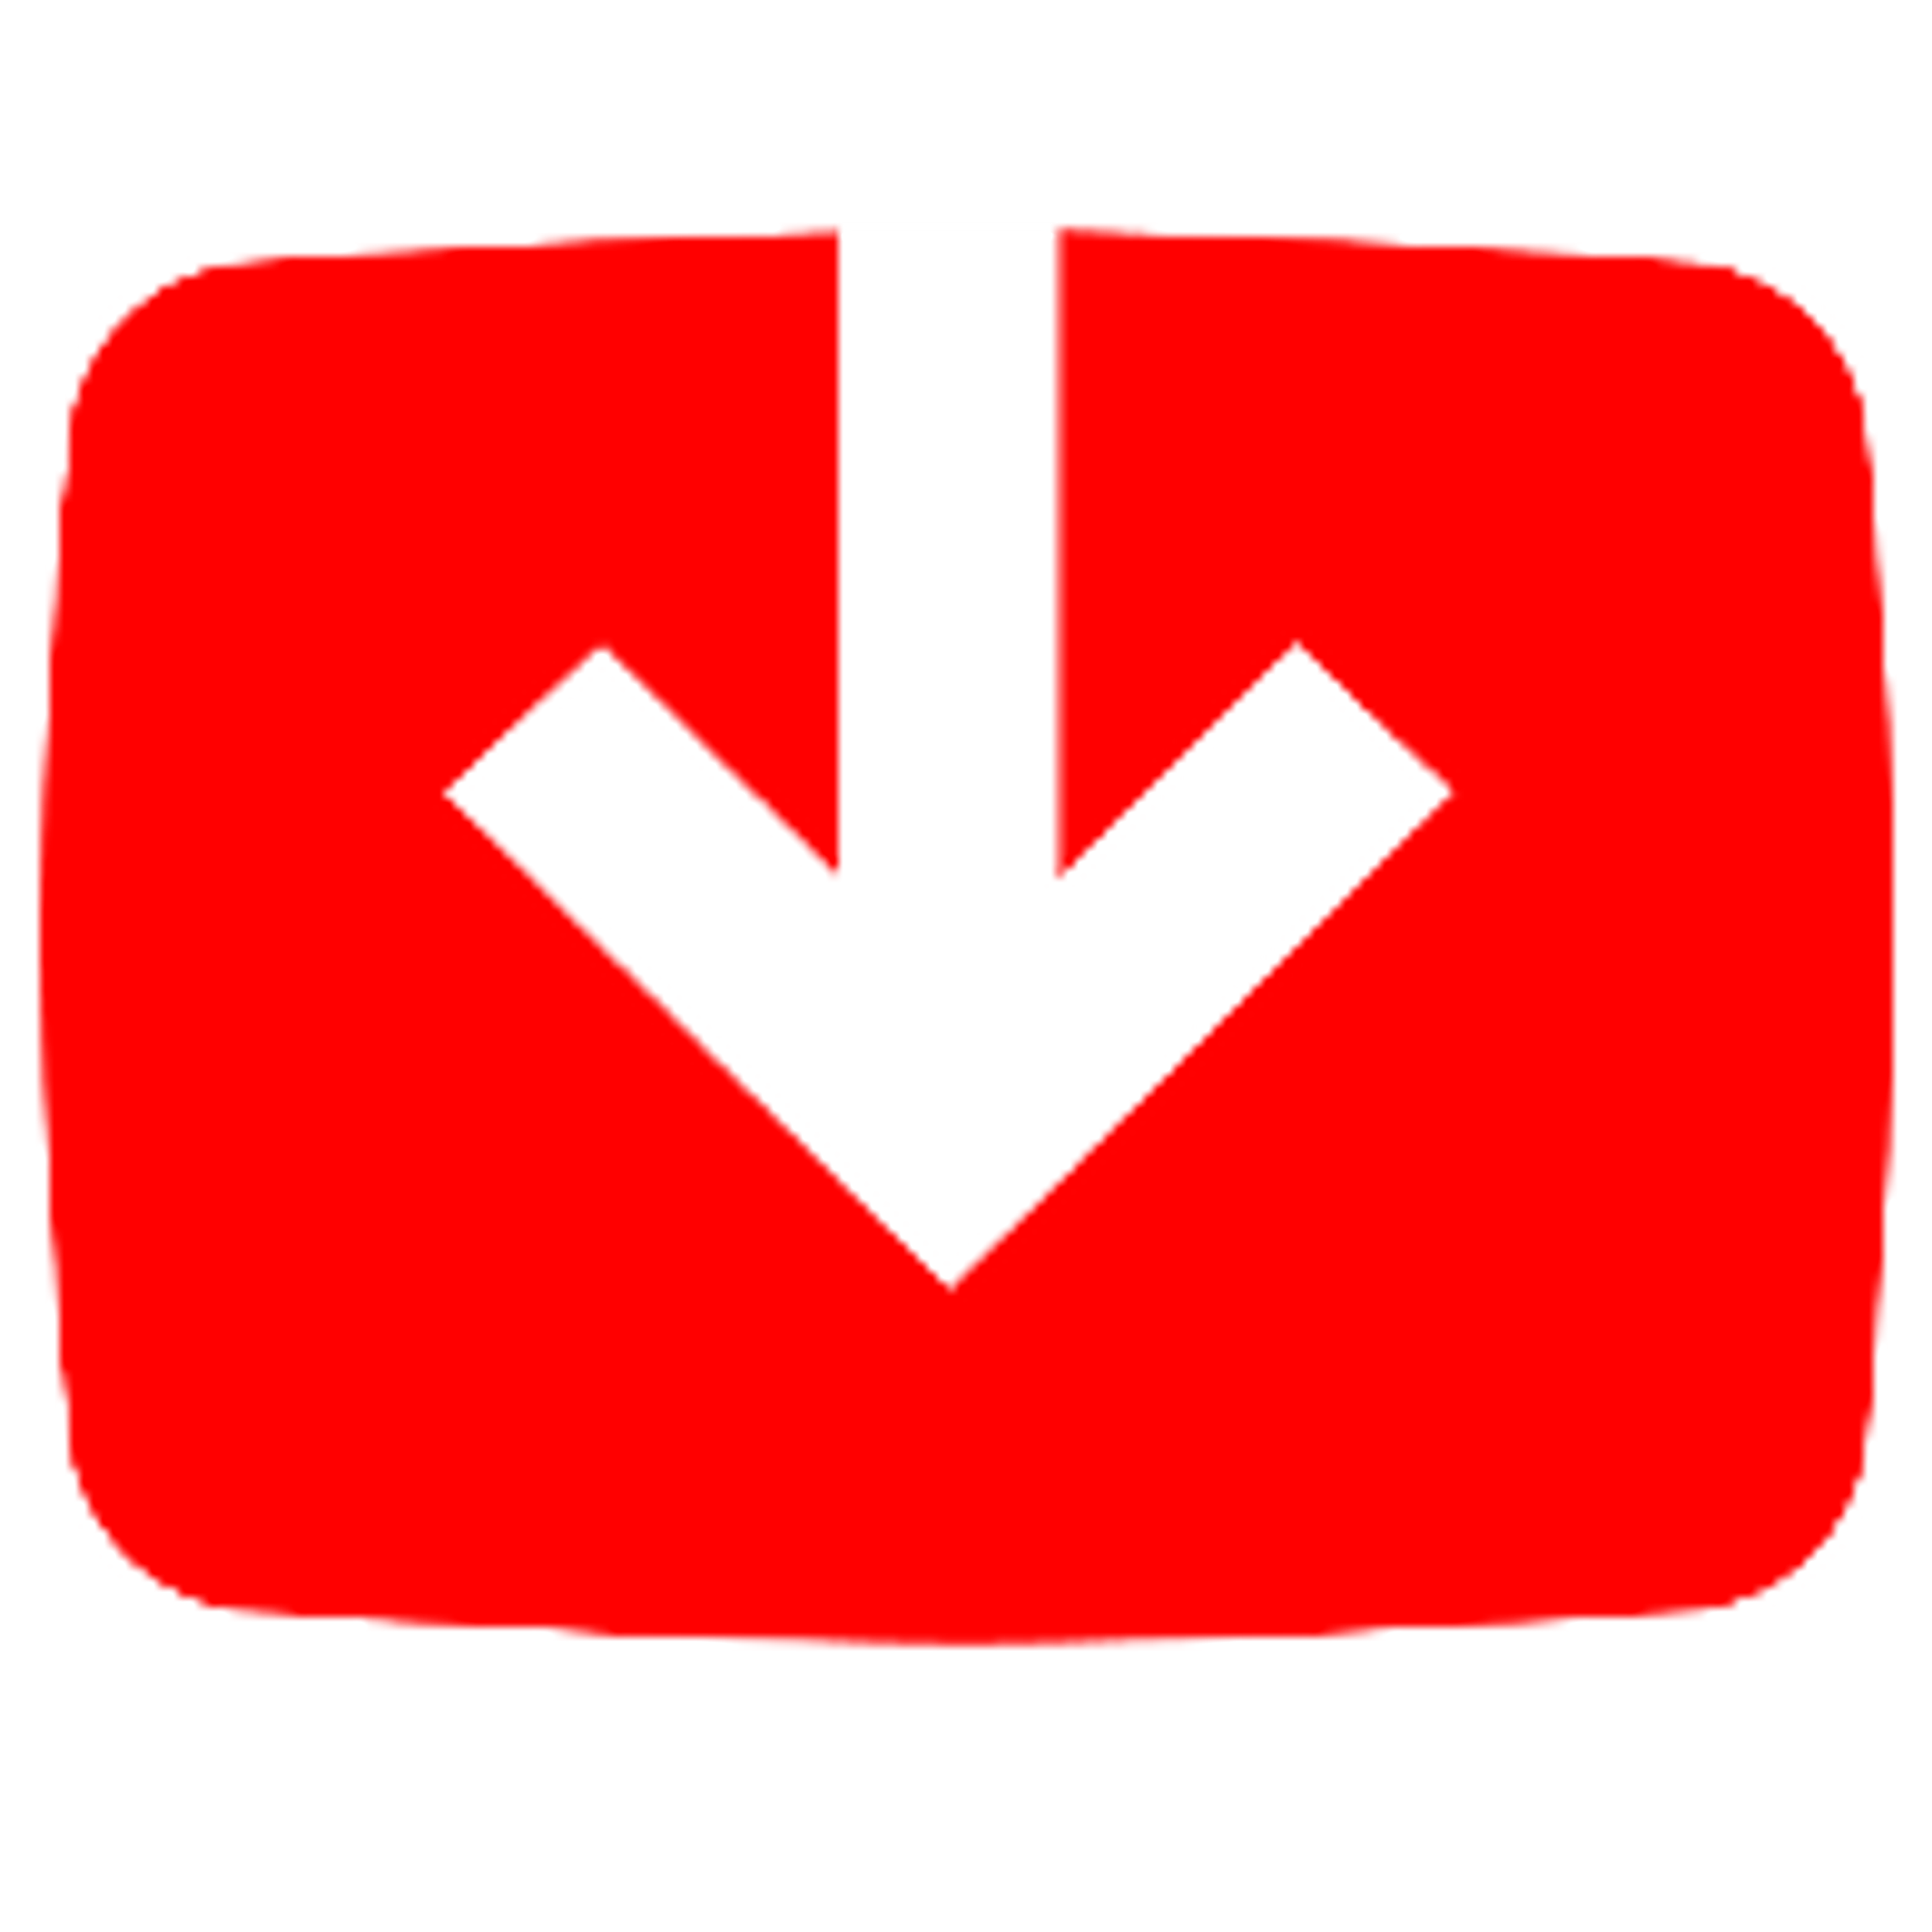 Youtube video downloader app. Use to download Youtube videos.